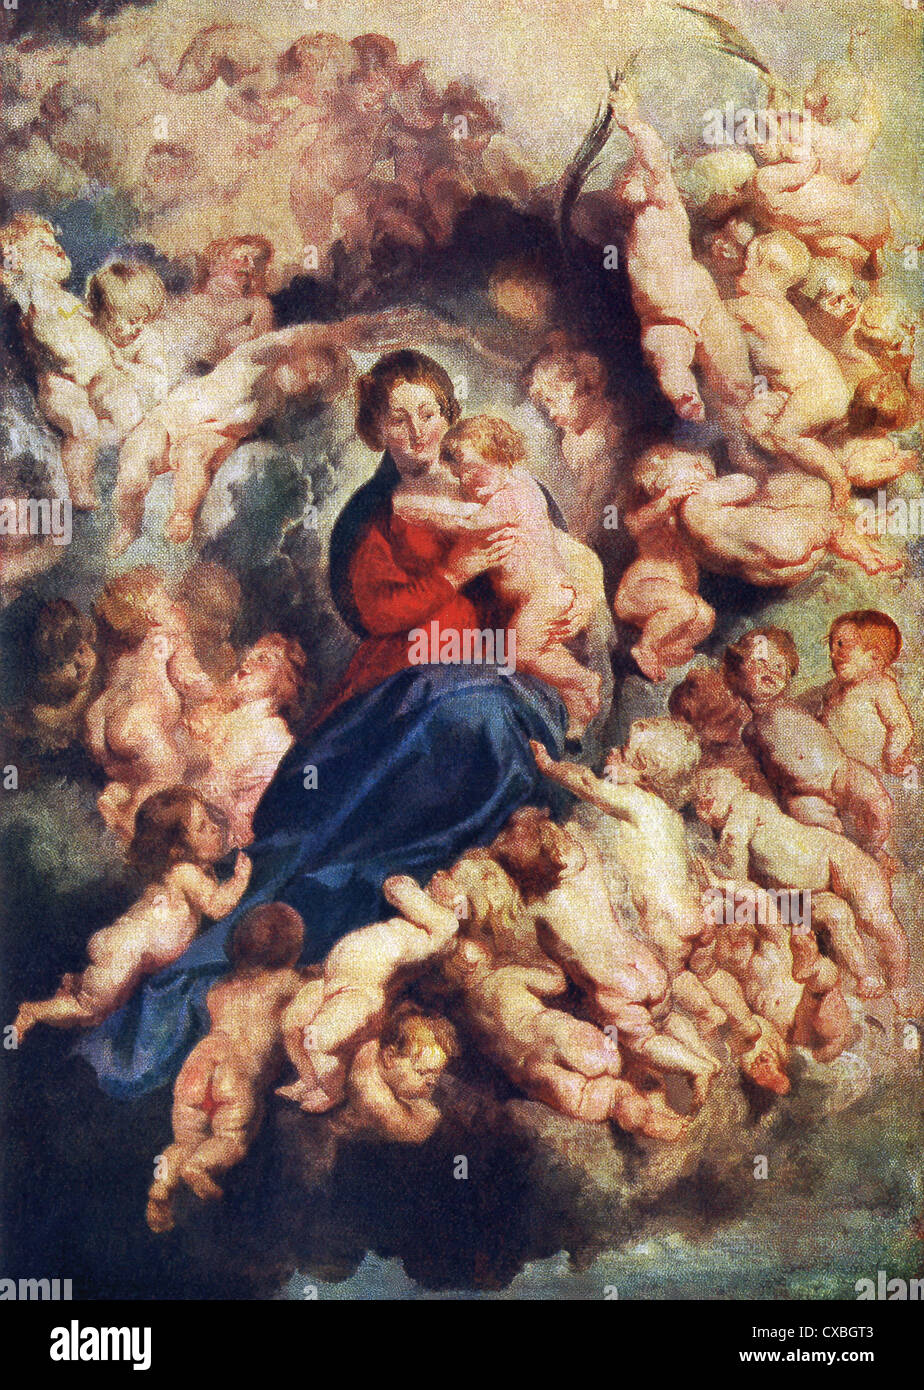 This painting by Peter Paul Rubens shows the Virgin Mary with her son Jesus Christ, surrounded by the Holy Innocents. Stock Photo